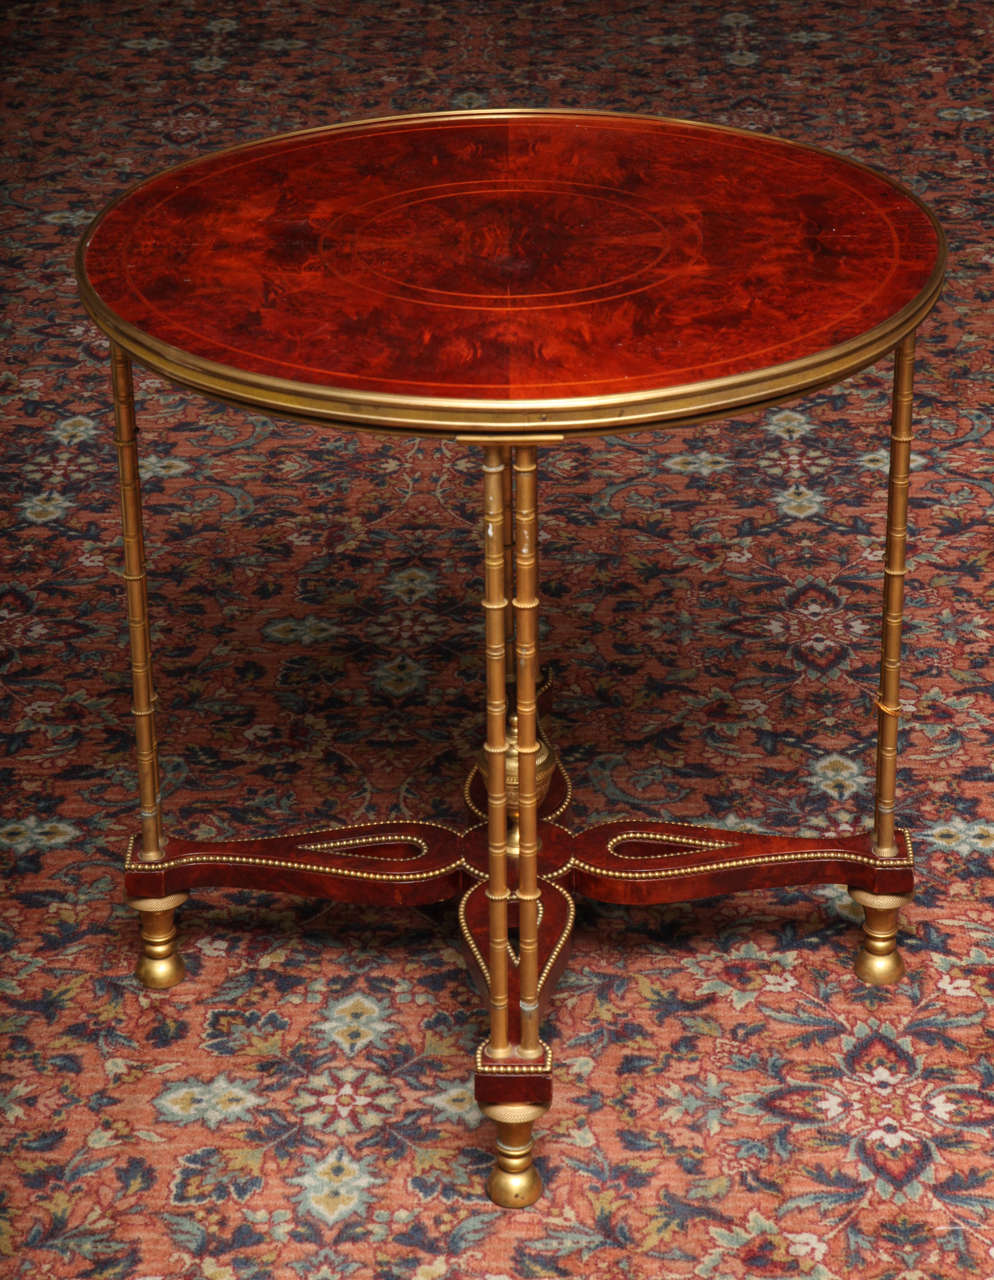 A unique antique French Louis XVI gilt bronze mounted mahogany guéridon of fine detail embellished with eight gilt bronze bamboo legs and further adorned with a reticulated gilt bronze mounted stretcher with a central gilt bronze urn, after a model